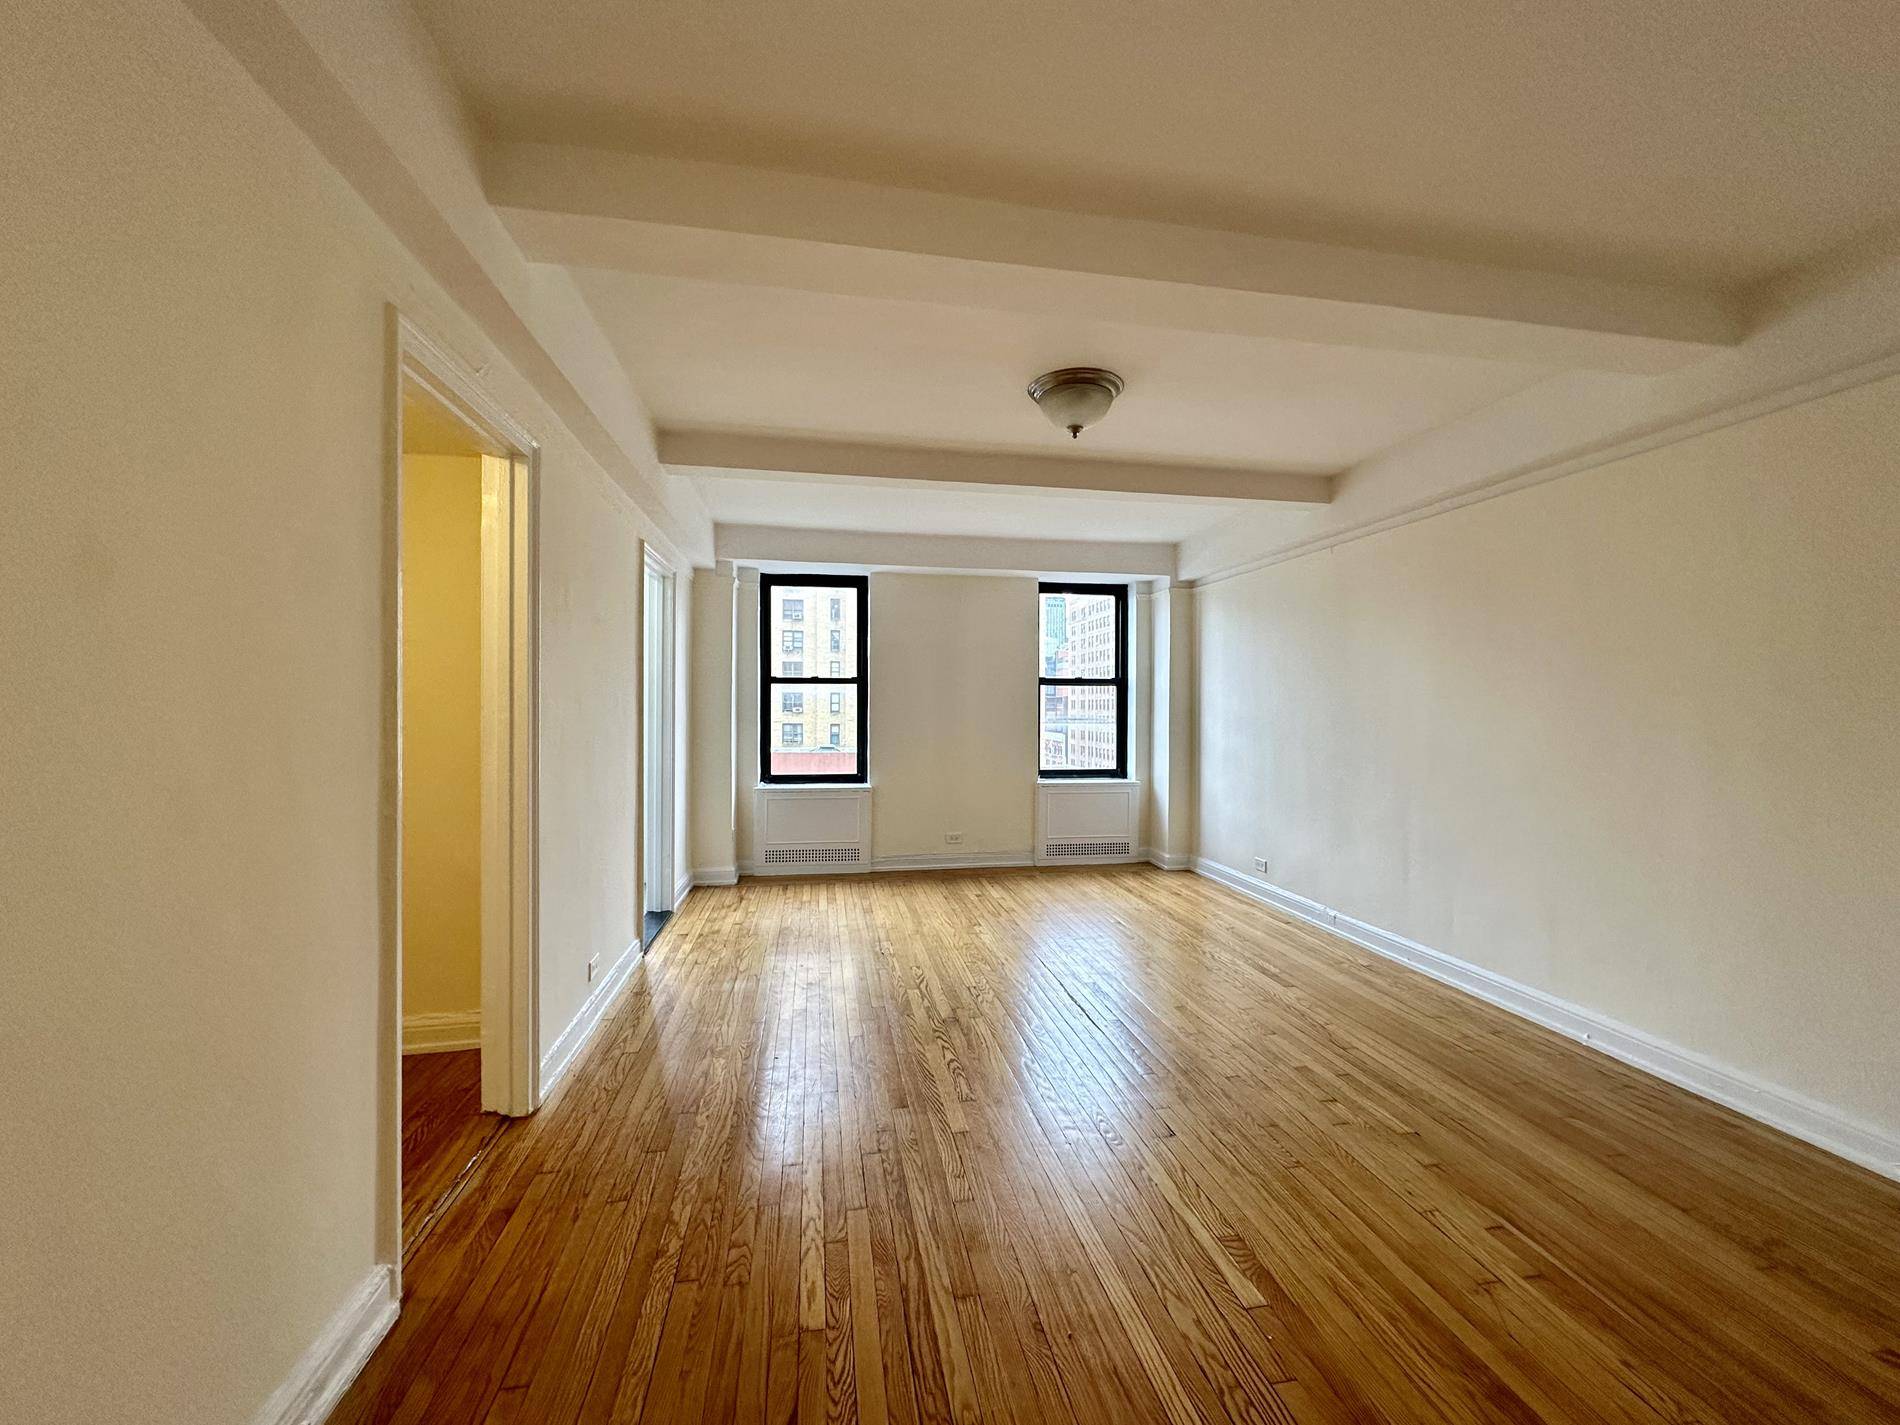 Come see this LARGE studio with great light and amazing city views, Large walk in closet and a separate nook off the bathroom for a desk dressing area.